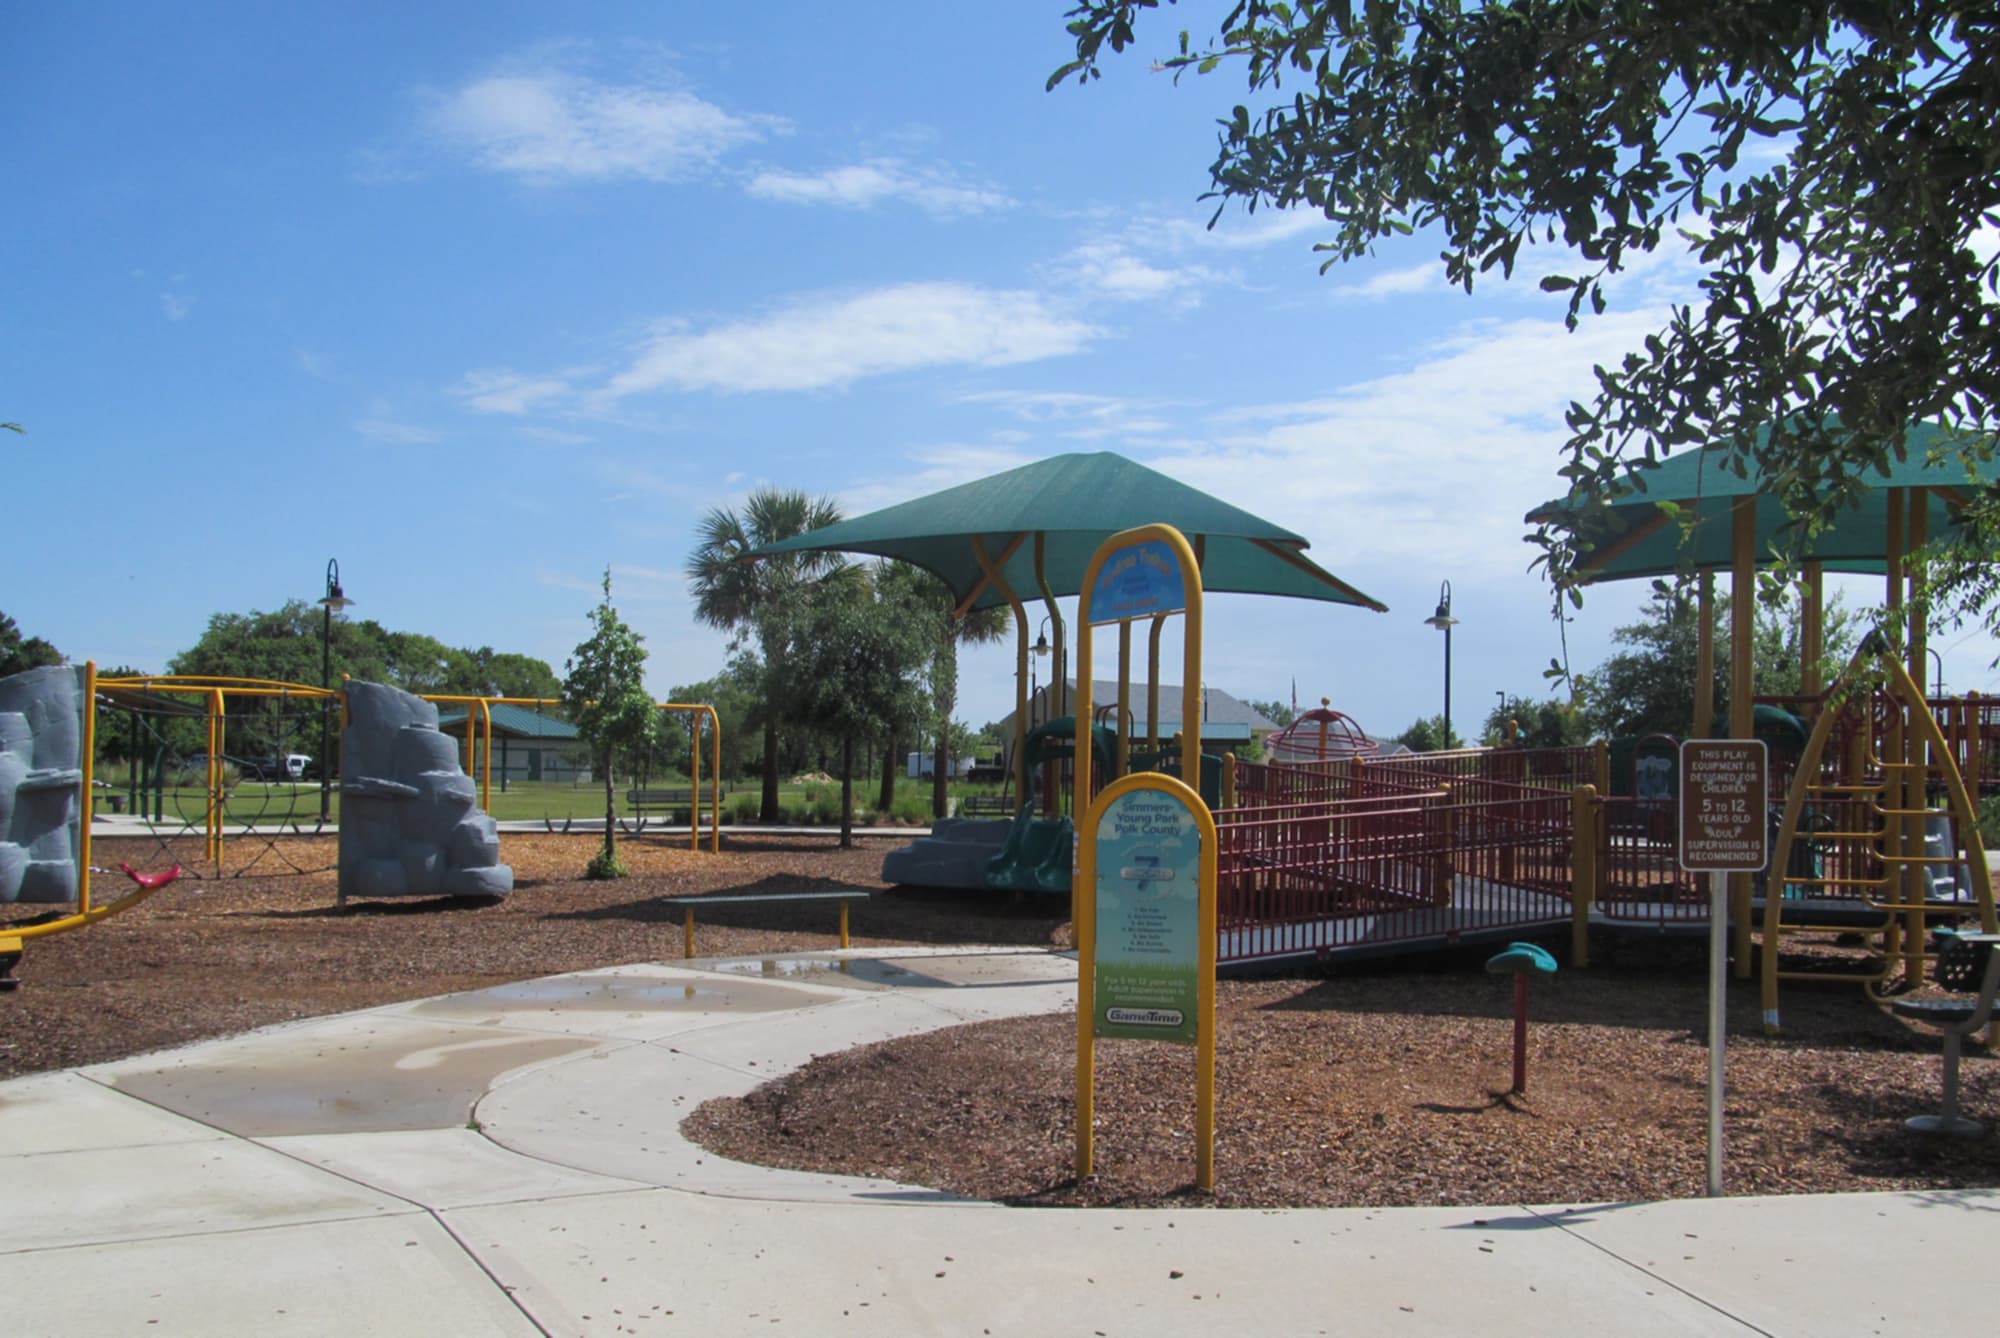 Playground area at Simmers-Young Park in Winter Haven, FL